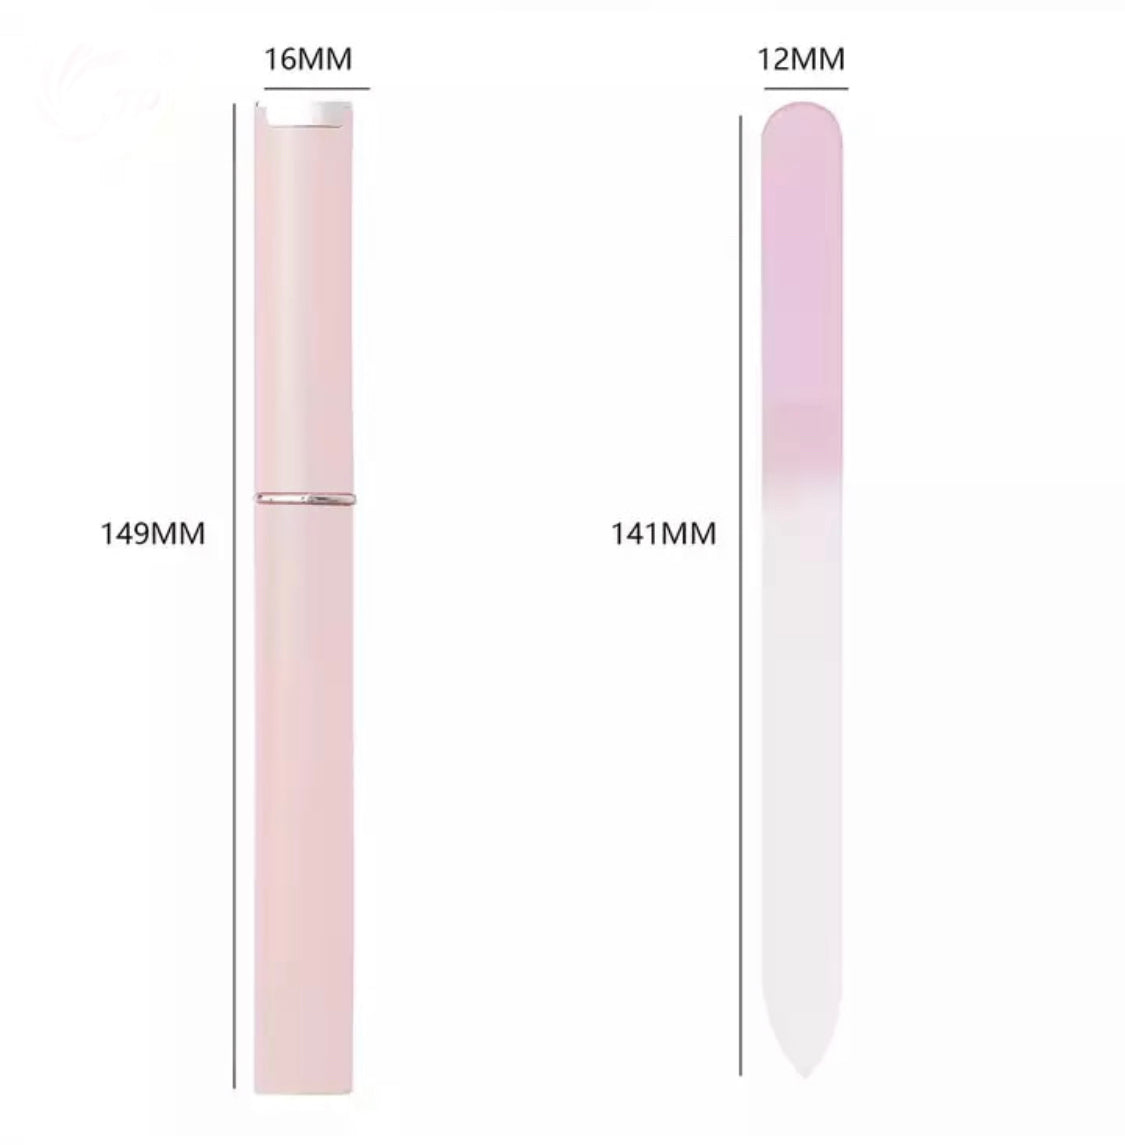 Crystal Glass Nail File (Mystic)